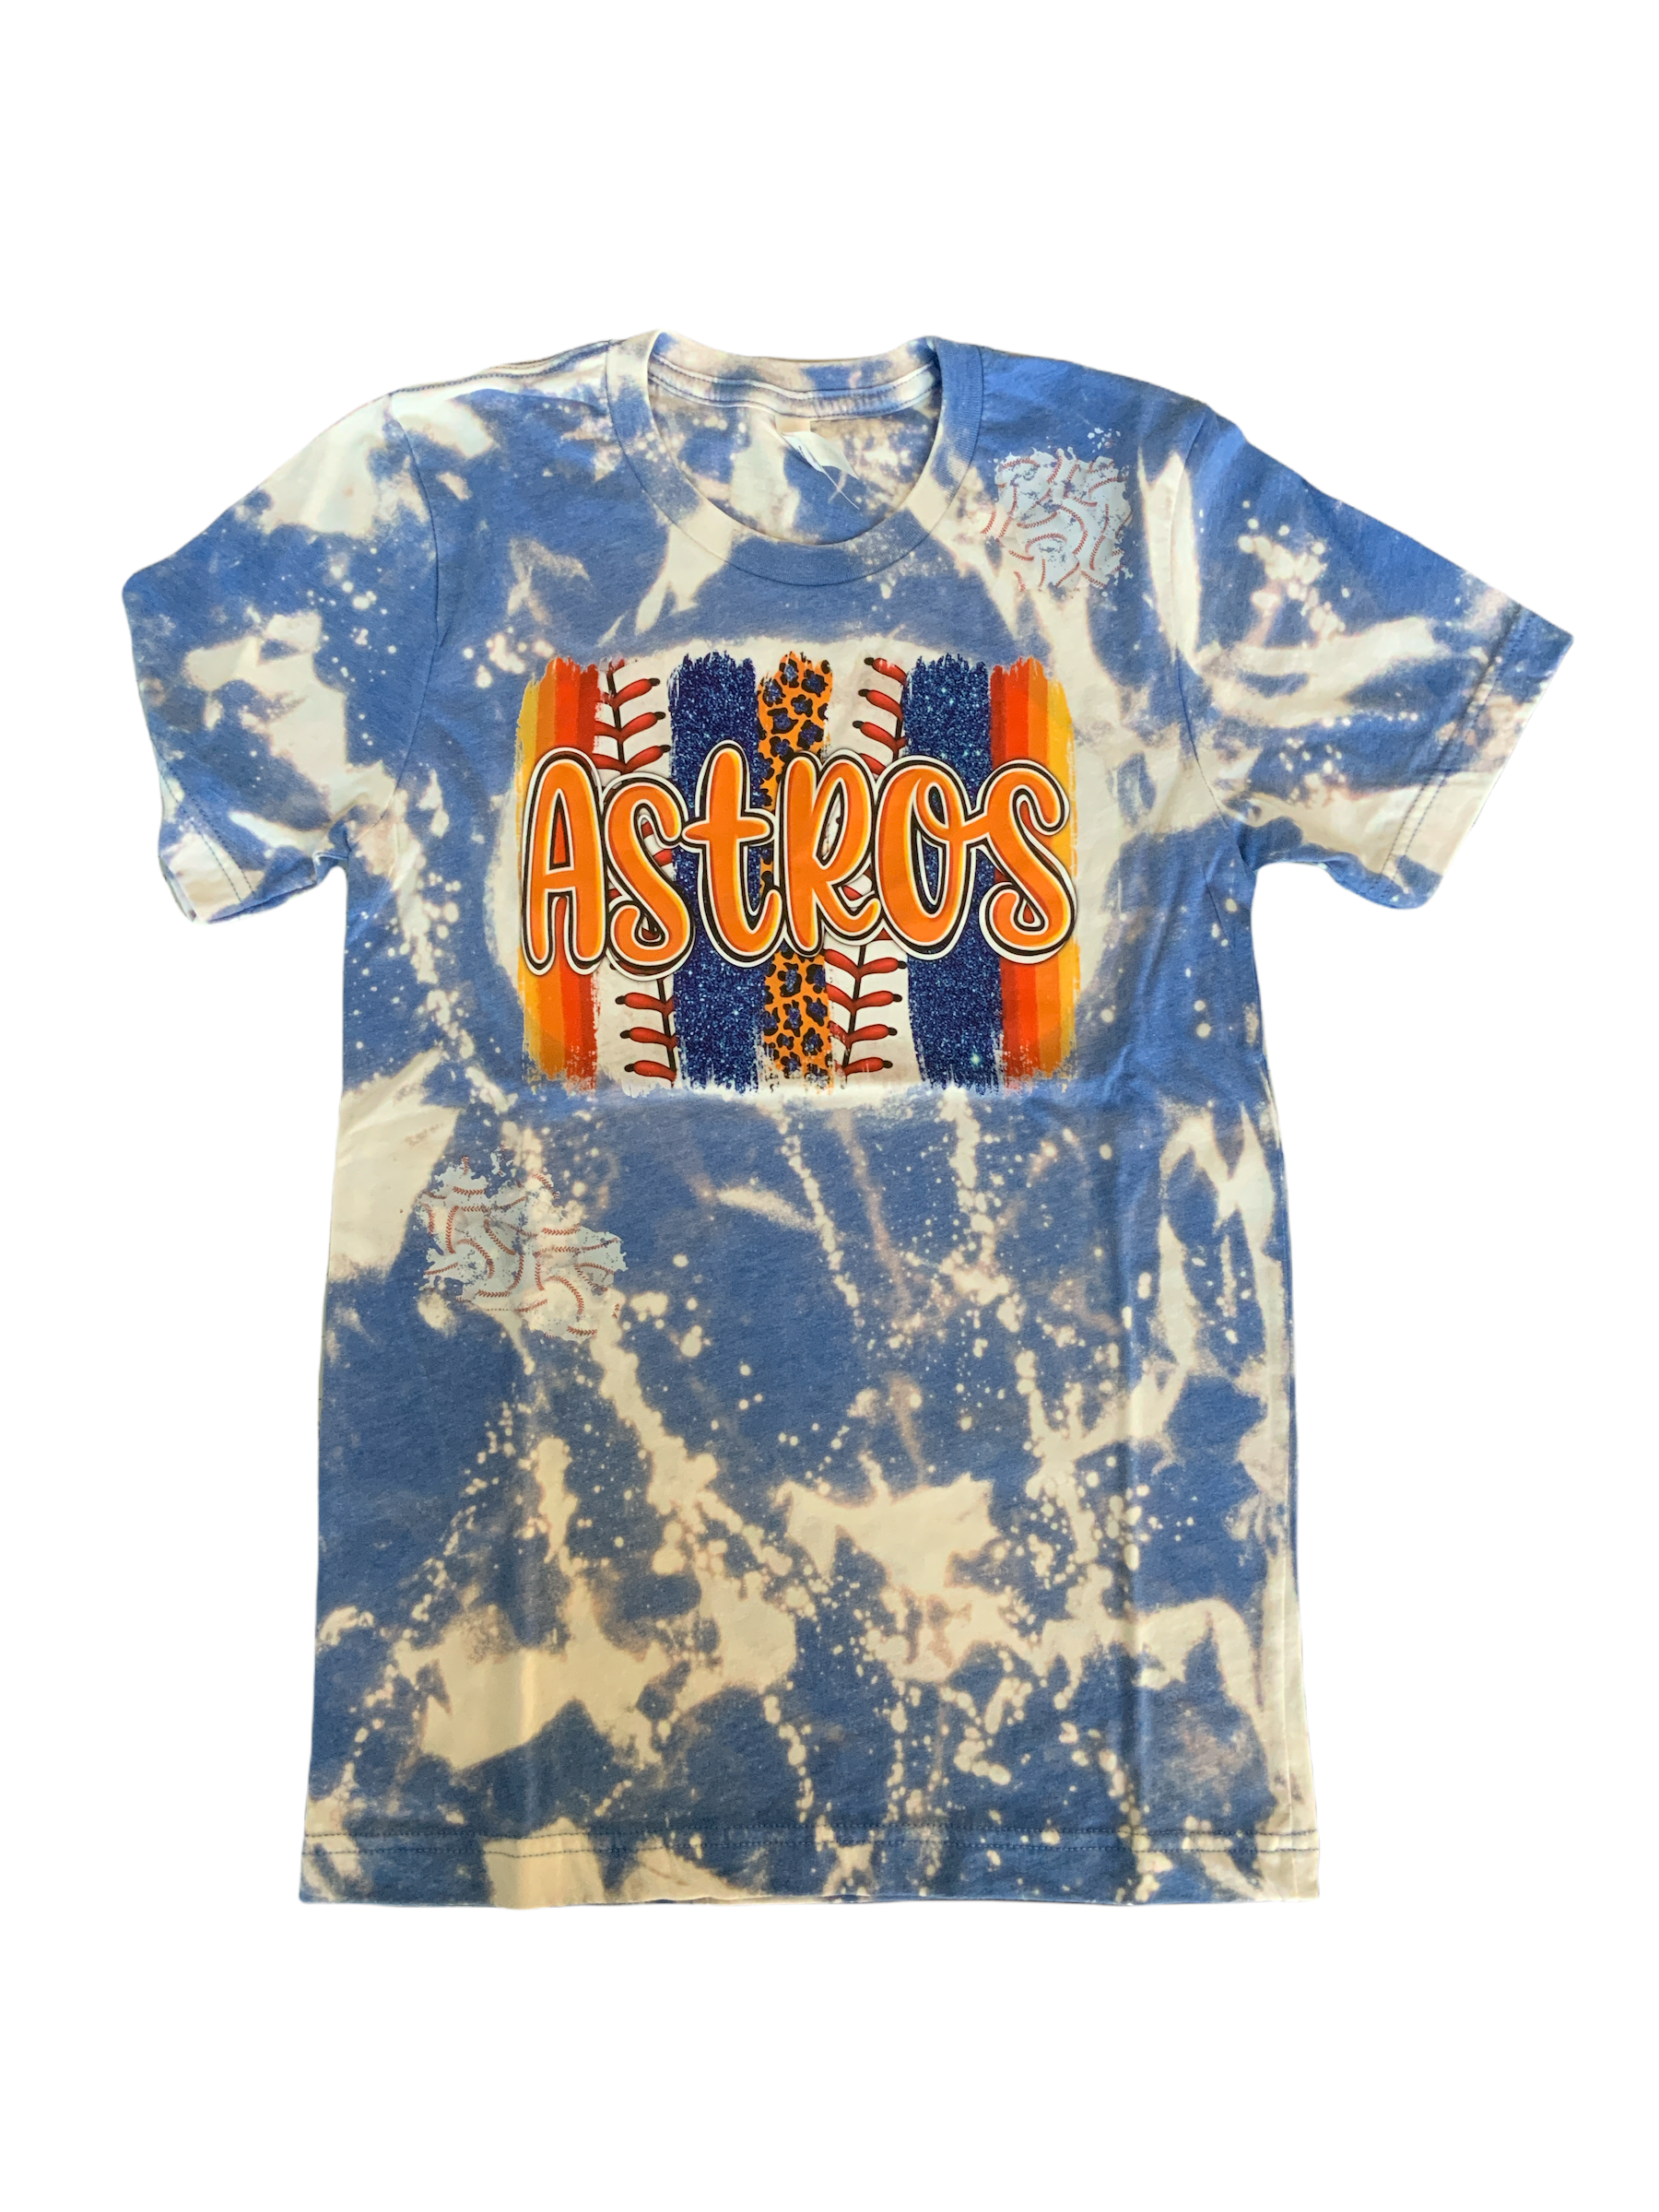 RTS Adult (XS) Houston Astros (Graphic T-shirt) - Baby Bums Clothing 